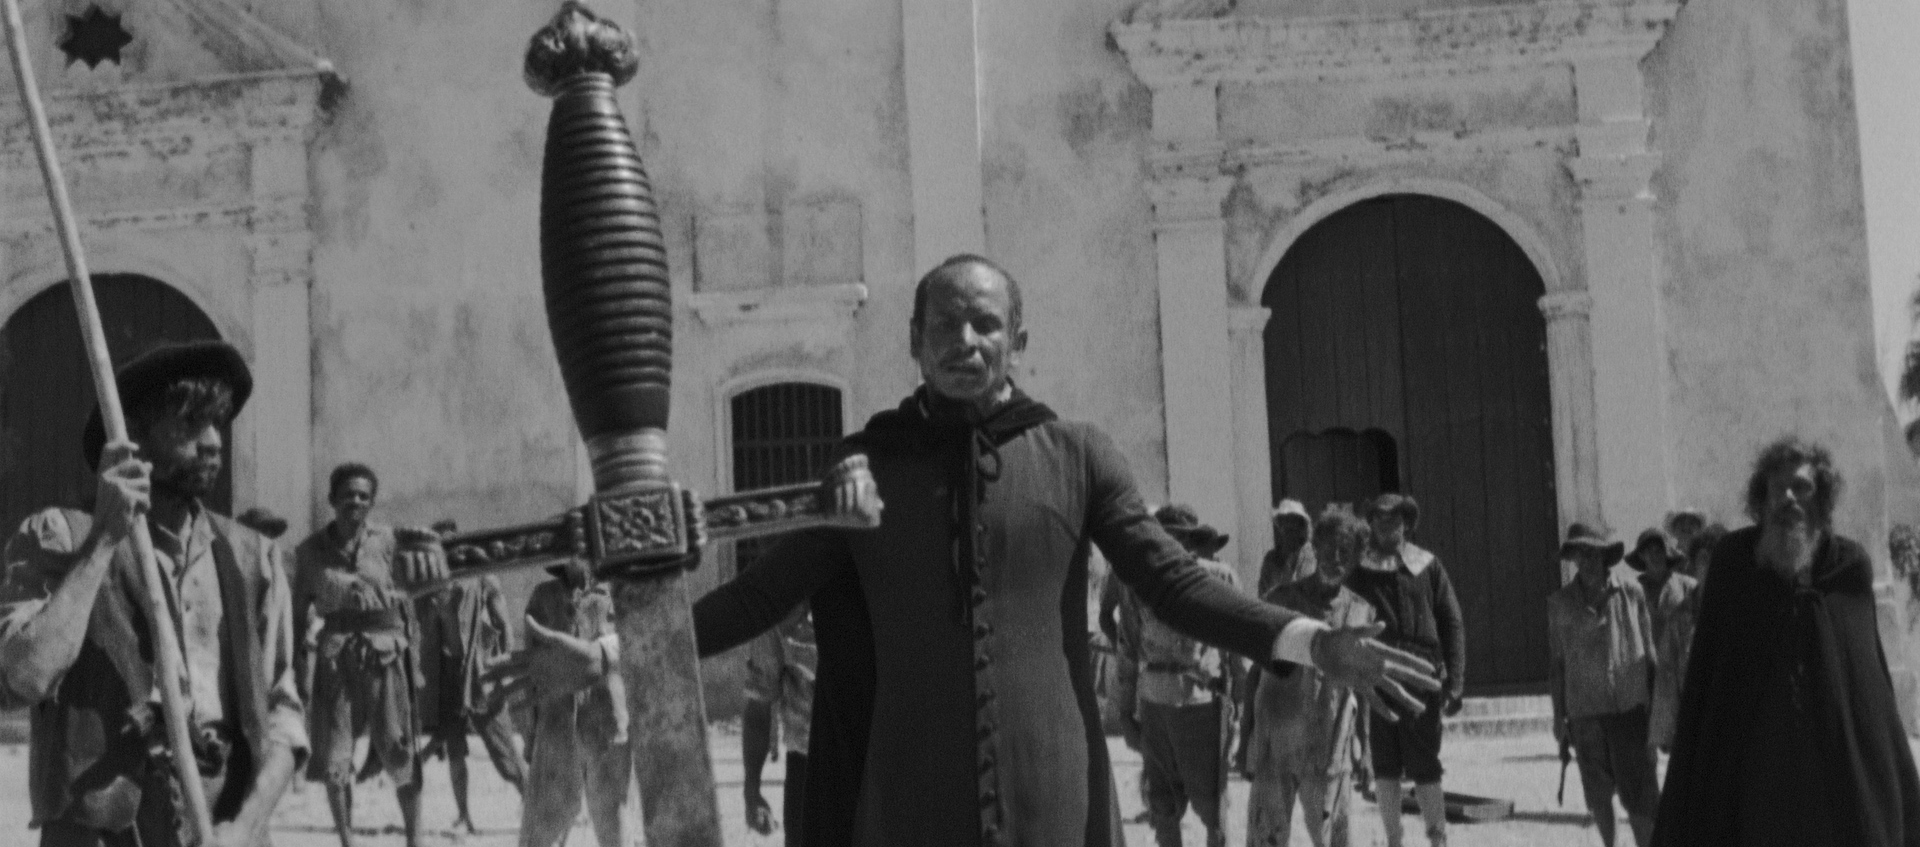 A man in religious garb stands with his hands out to his sides in front of a large stone building behind a giant sword stuck in the ground.